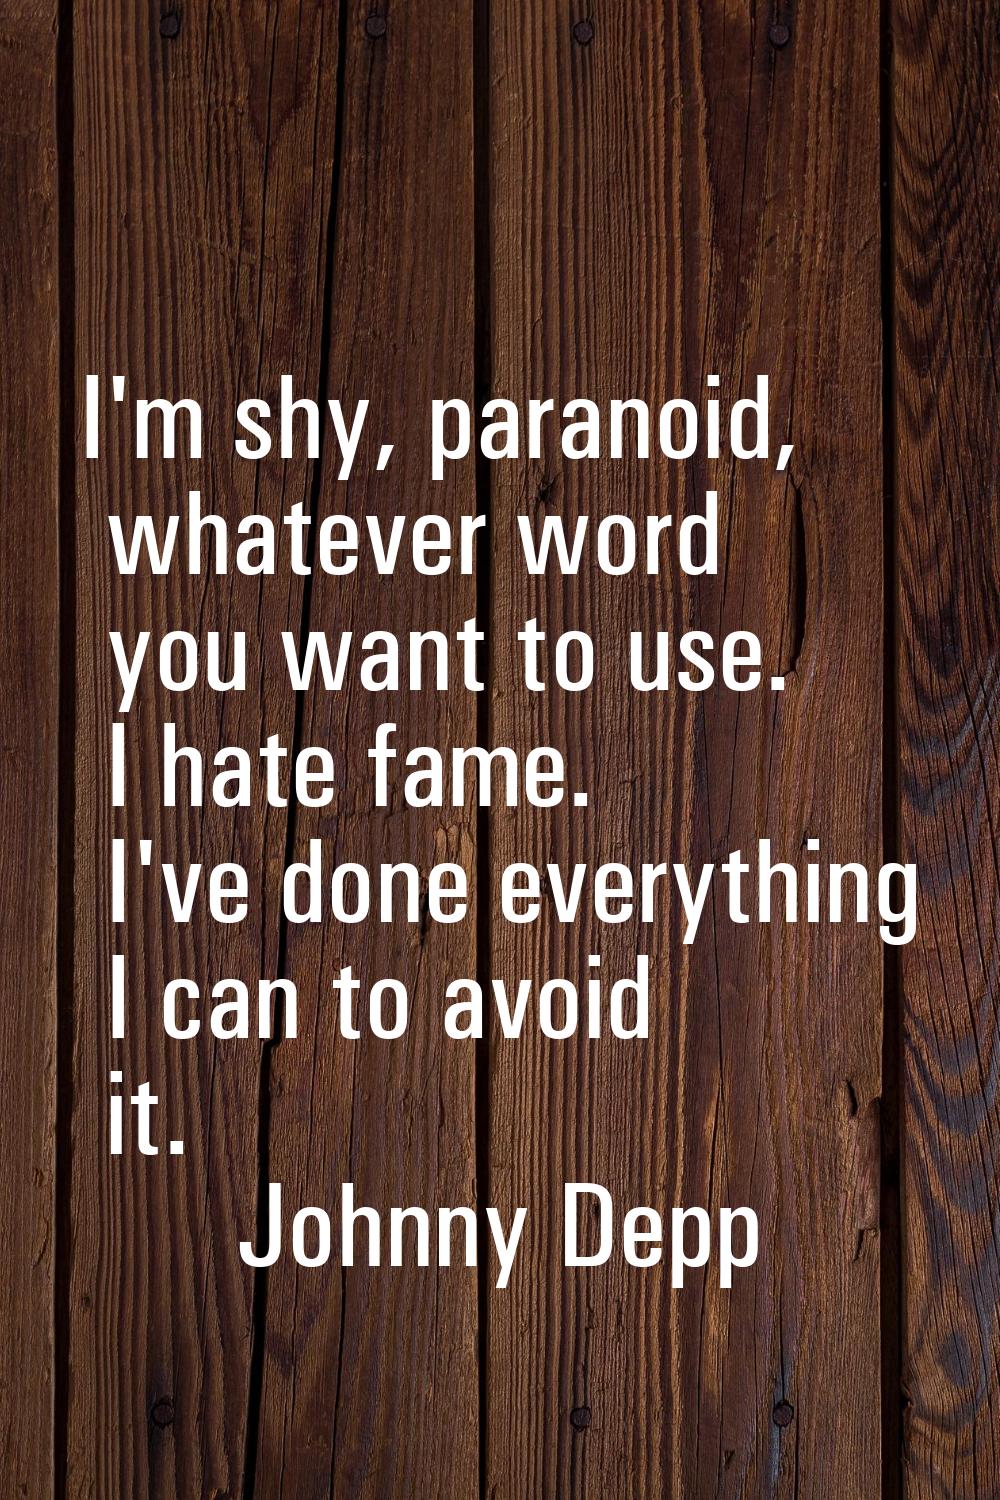 I'm shy, paranoid, whatever word you want to use. I hate fame. I've done everything I can to avoid 